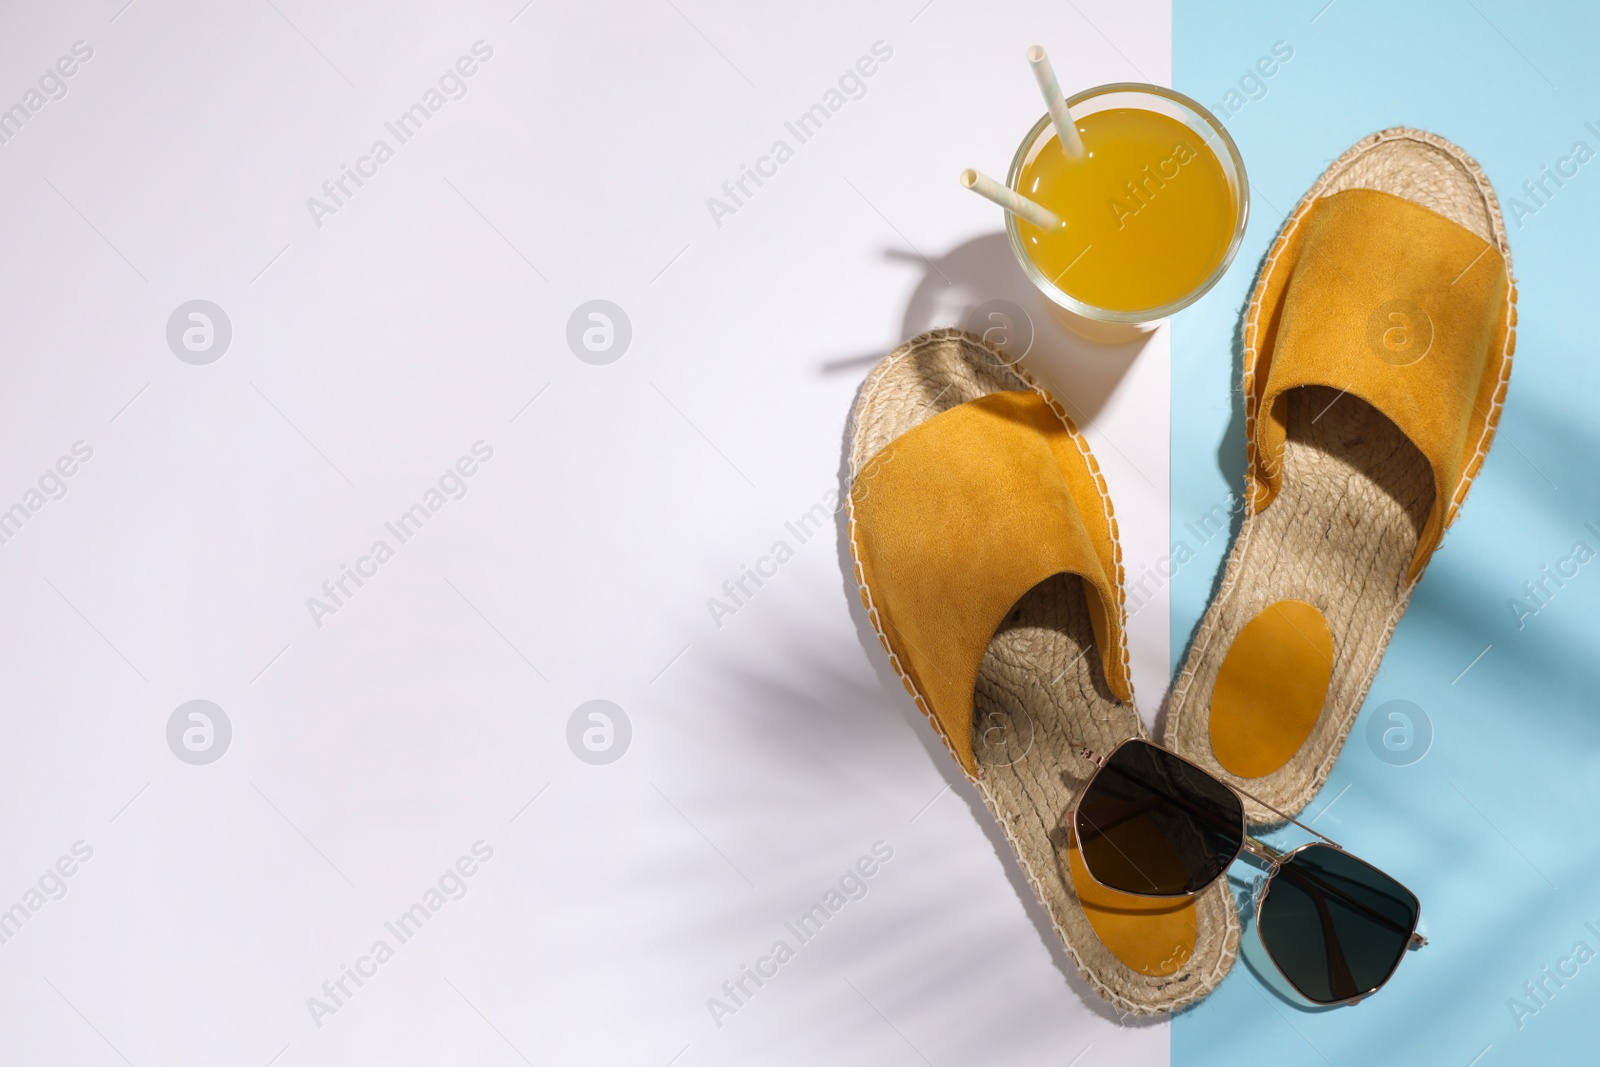 Photo of Stylish shoes, sunglasses and glass of juice on color background, flat lay with space for text. Beach objects